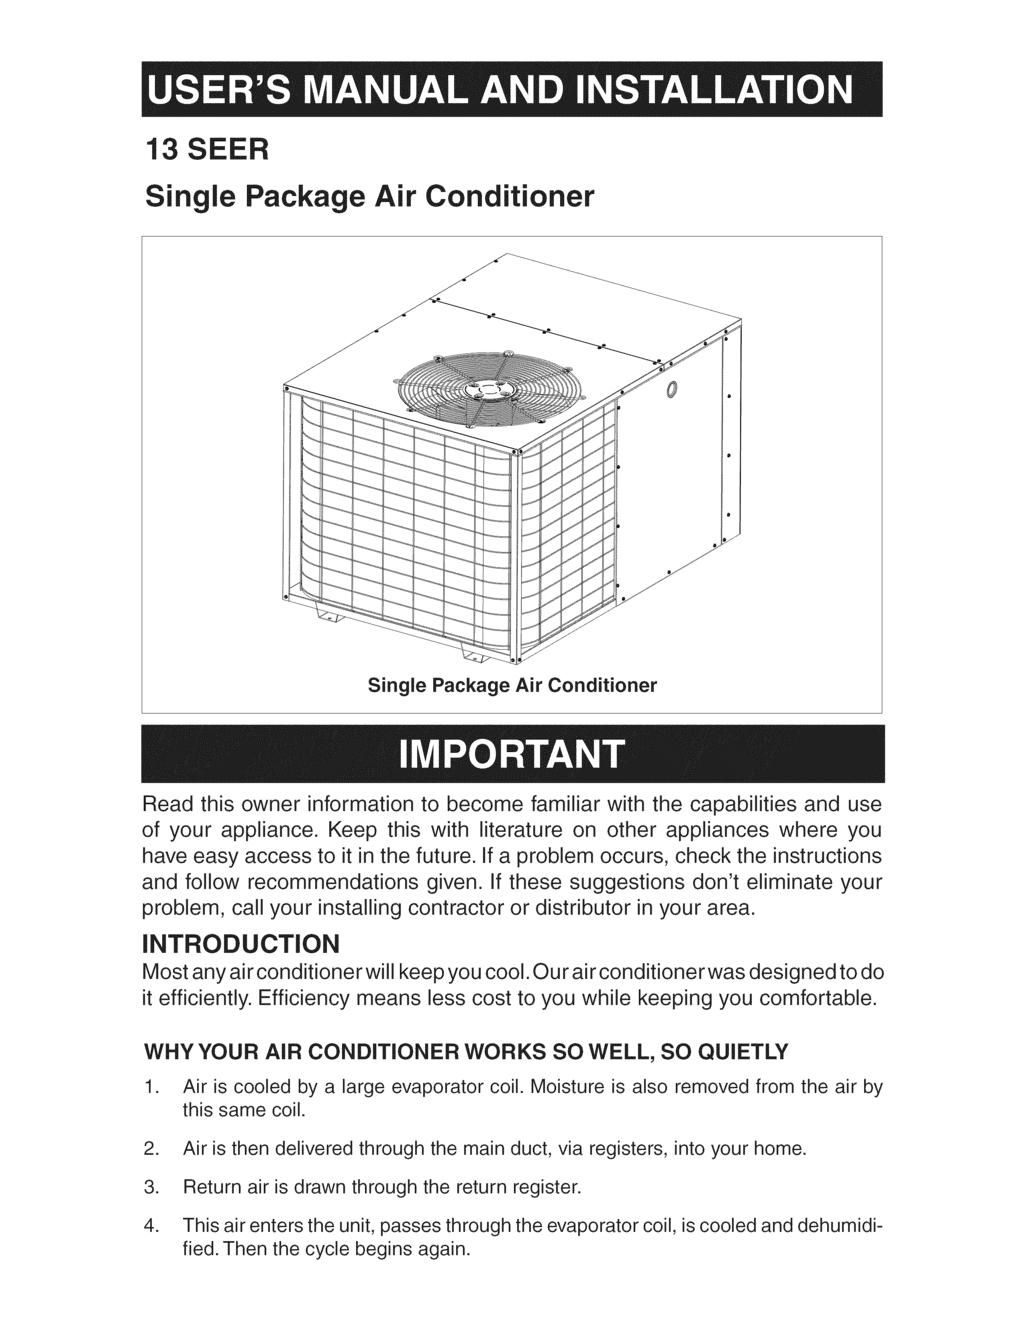 13 SEER Single Package Air Conditioner Single Package Air Conditioner Read this owner information to become familiar with the capabilities and use of your appliance.